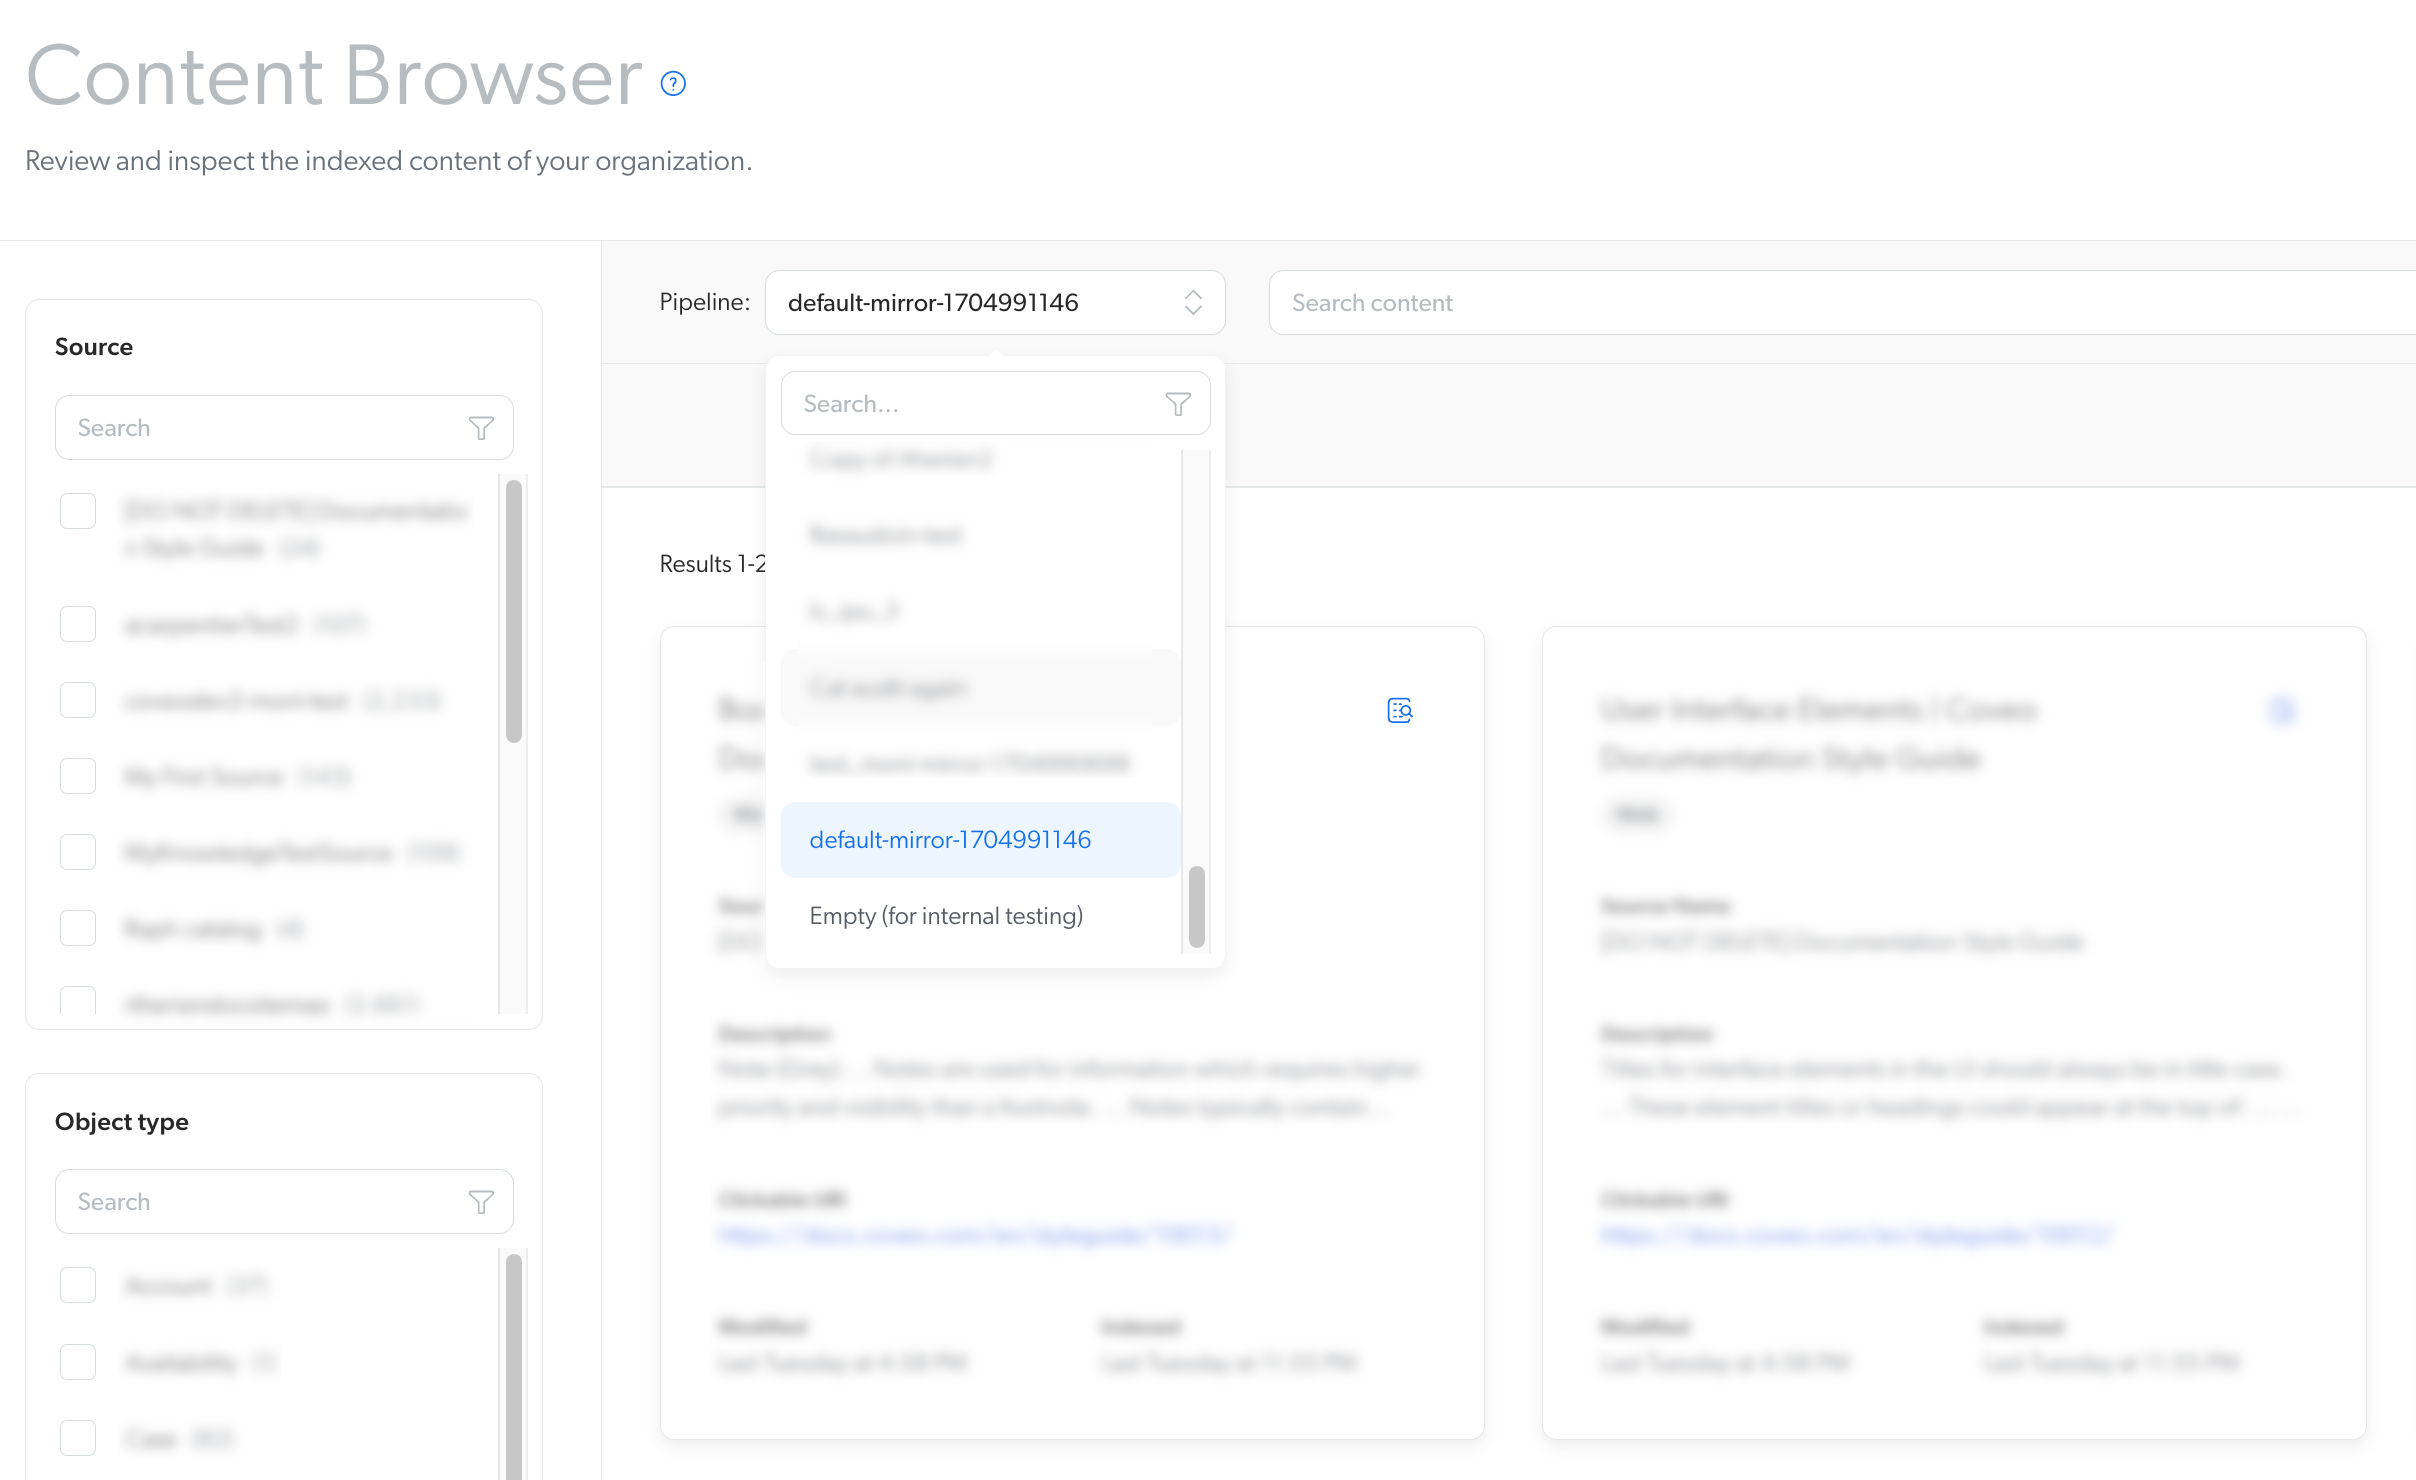 Mirror pipeline in content browser | Coveo